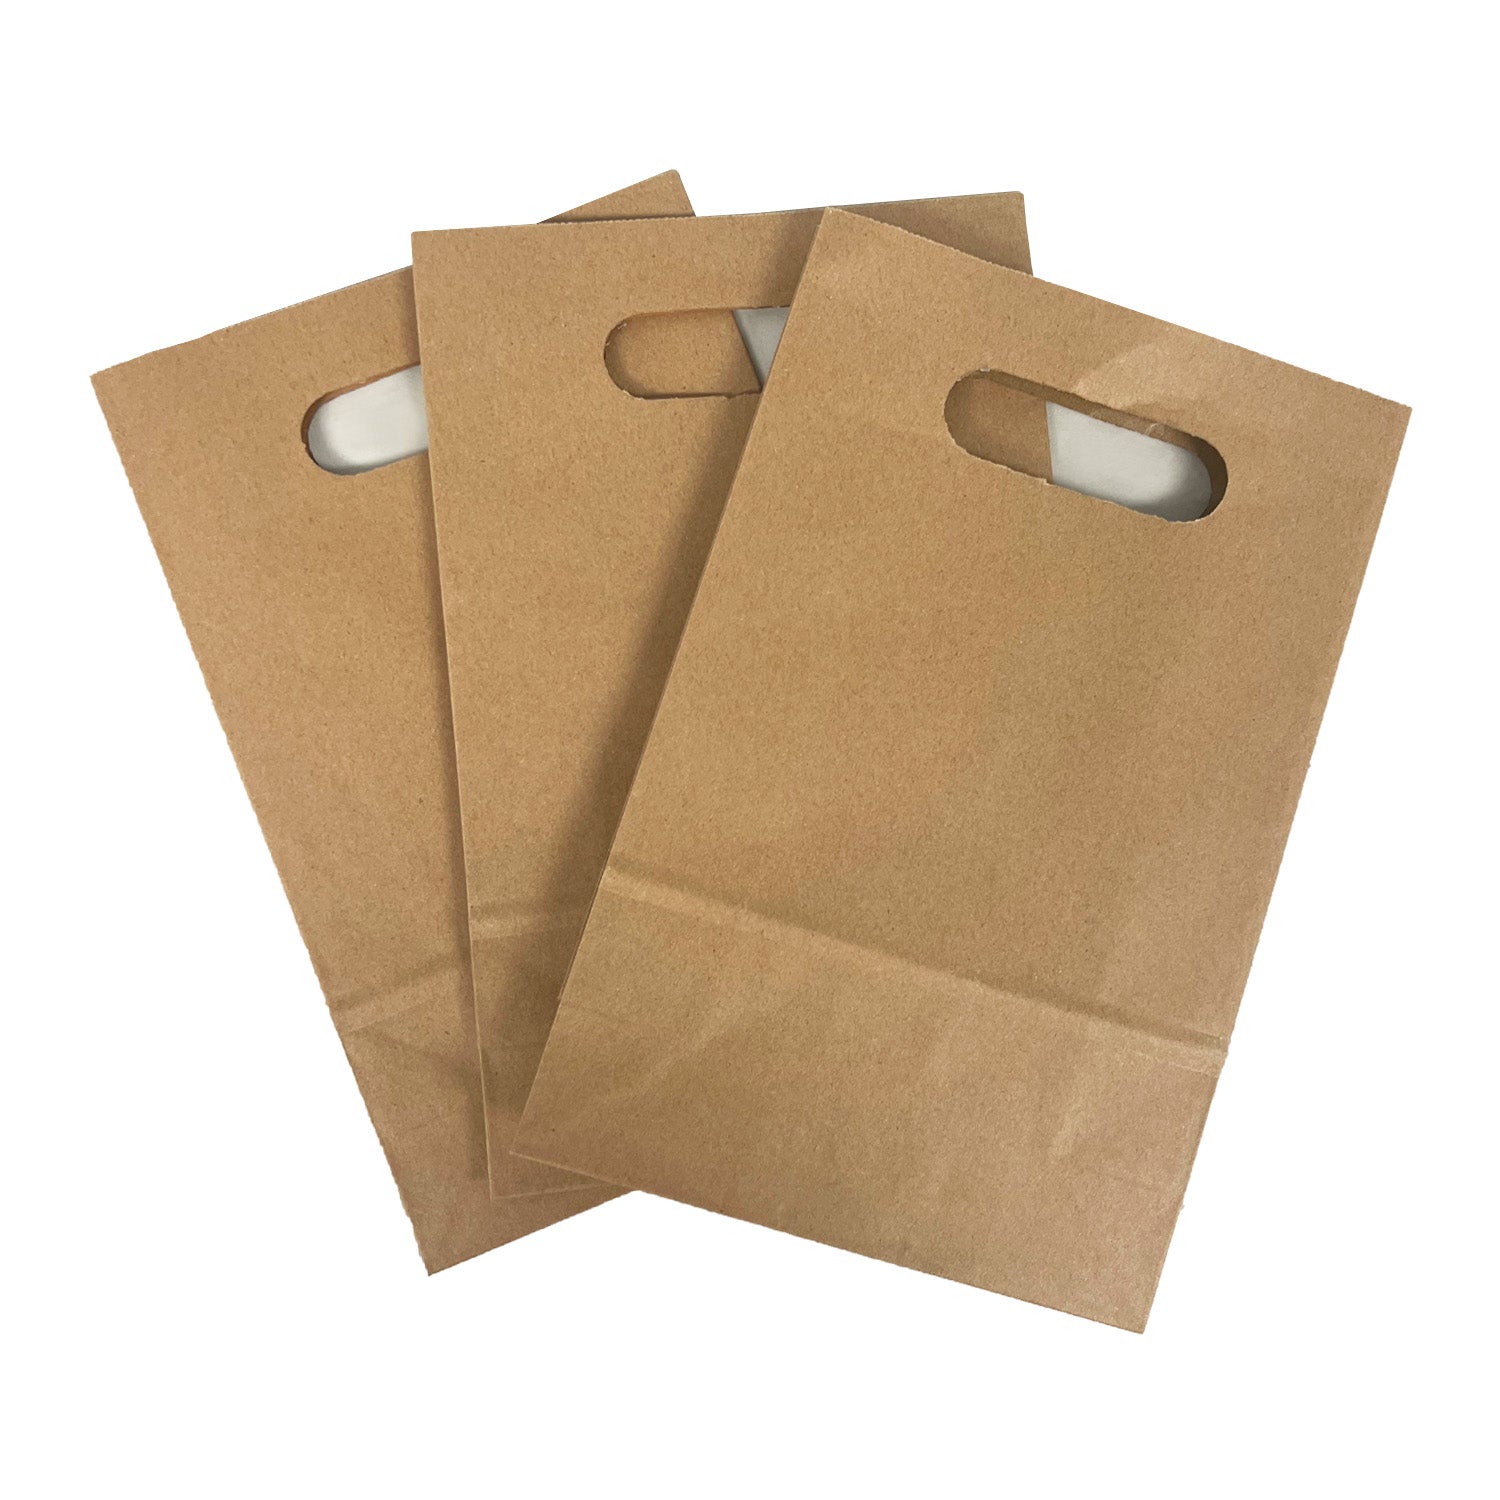 250pcs, Snack, 7 1/8x3 1/4x10 3/4 inches, Kraft Paper Bags, with Die Cut Handles